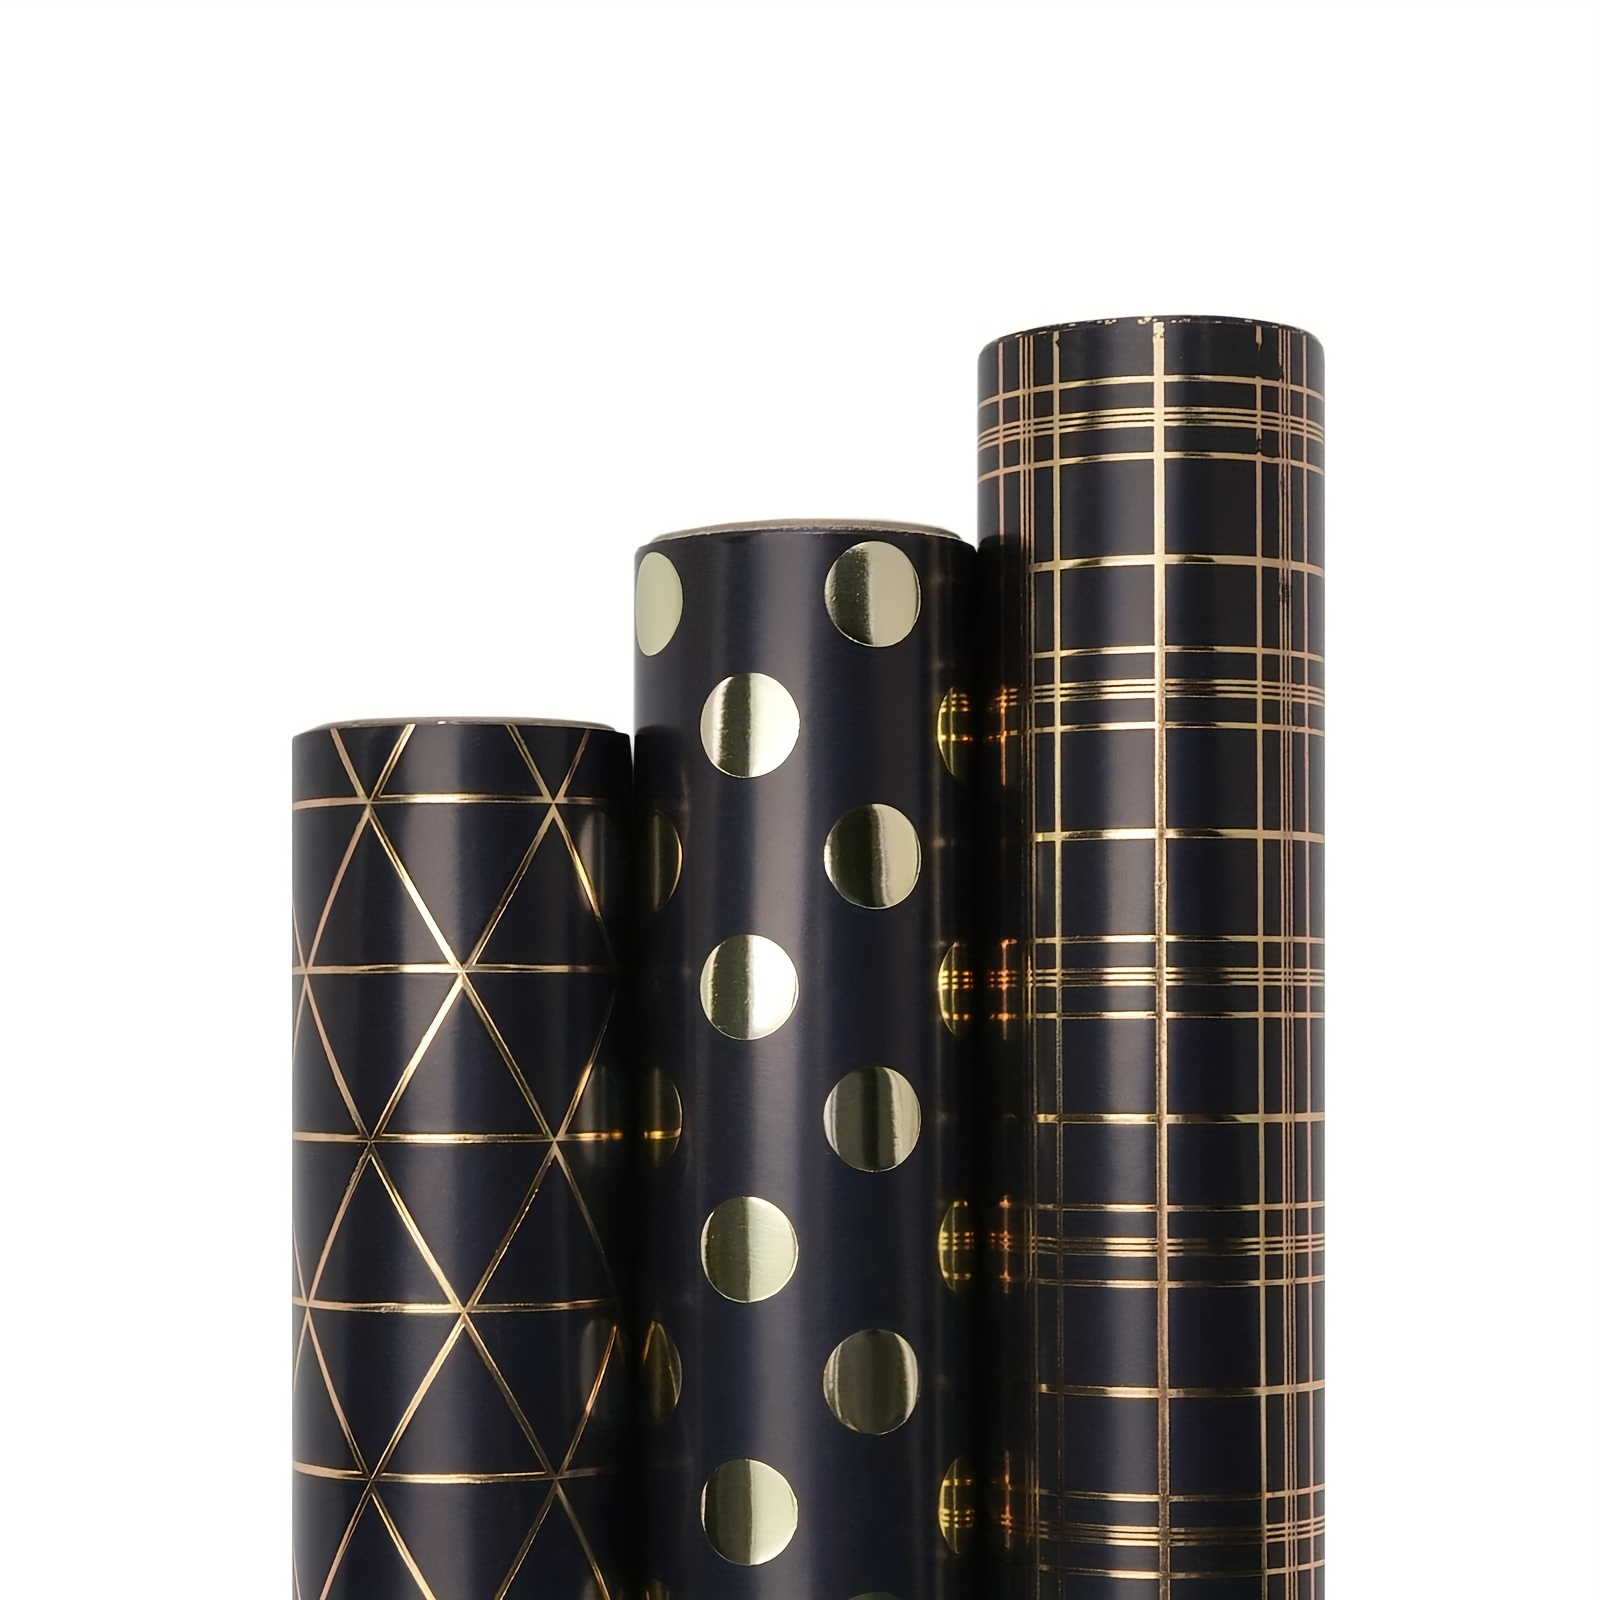 3 Rolls, Wrapping Paper Rolls, Gift Wrapping Paper Mini Rolls 17